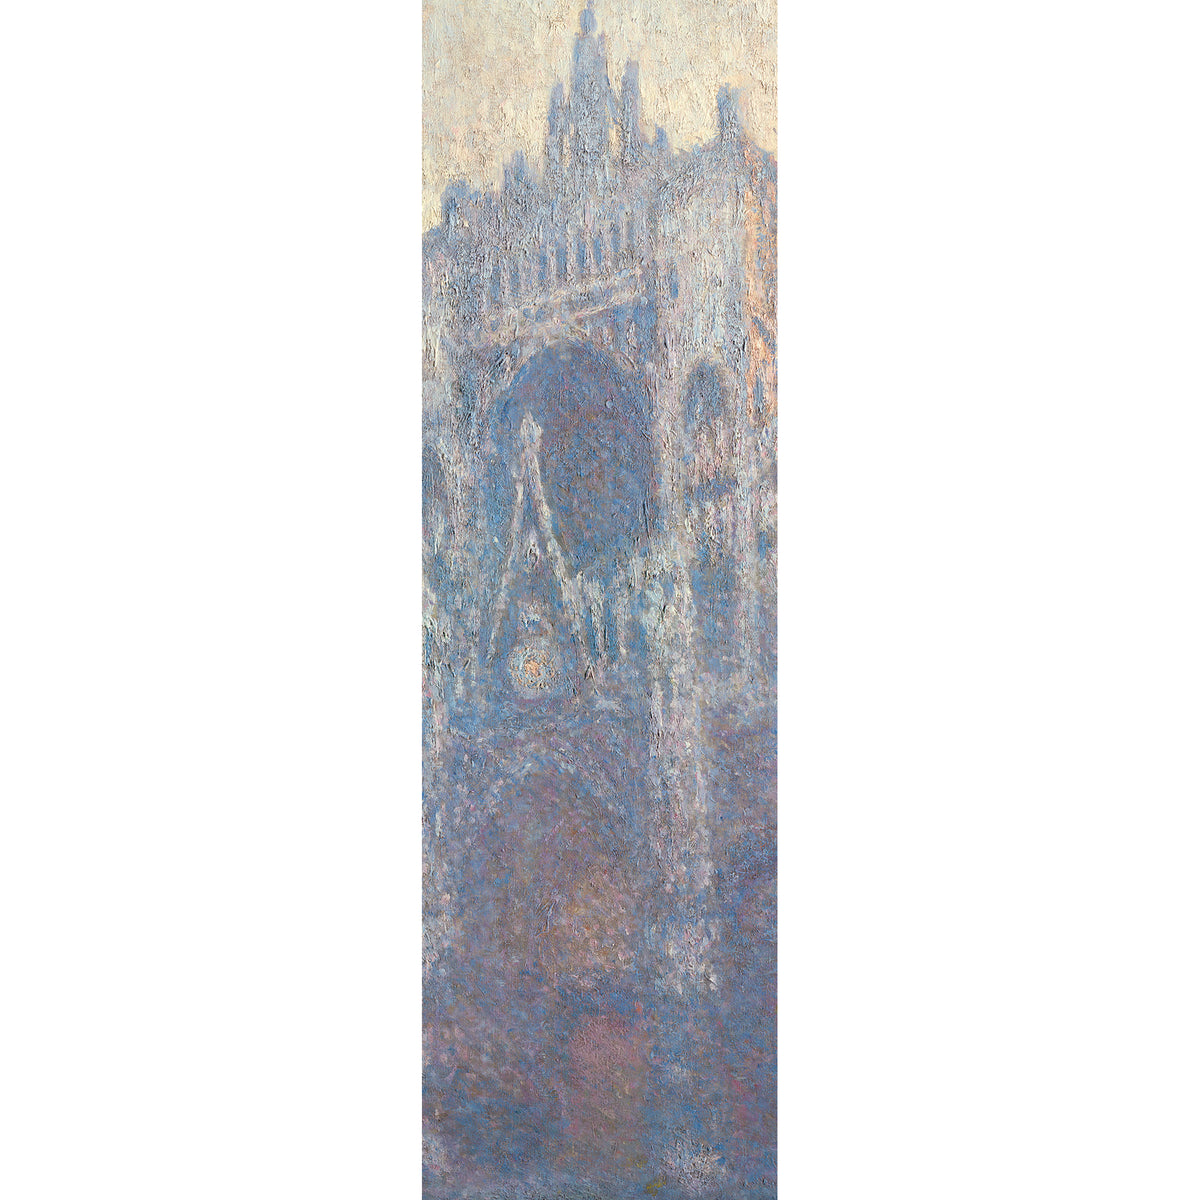 Monet The Portrait of Rouen Cathedral in Morning Light Paper Bookmark